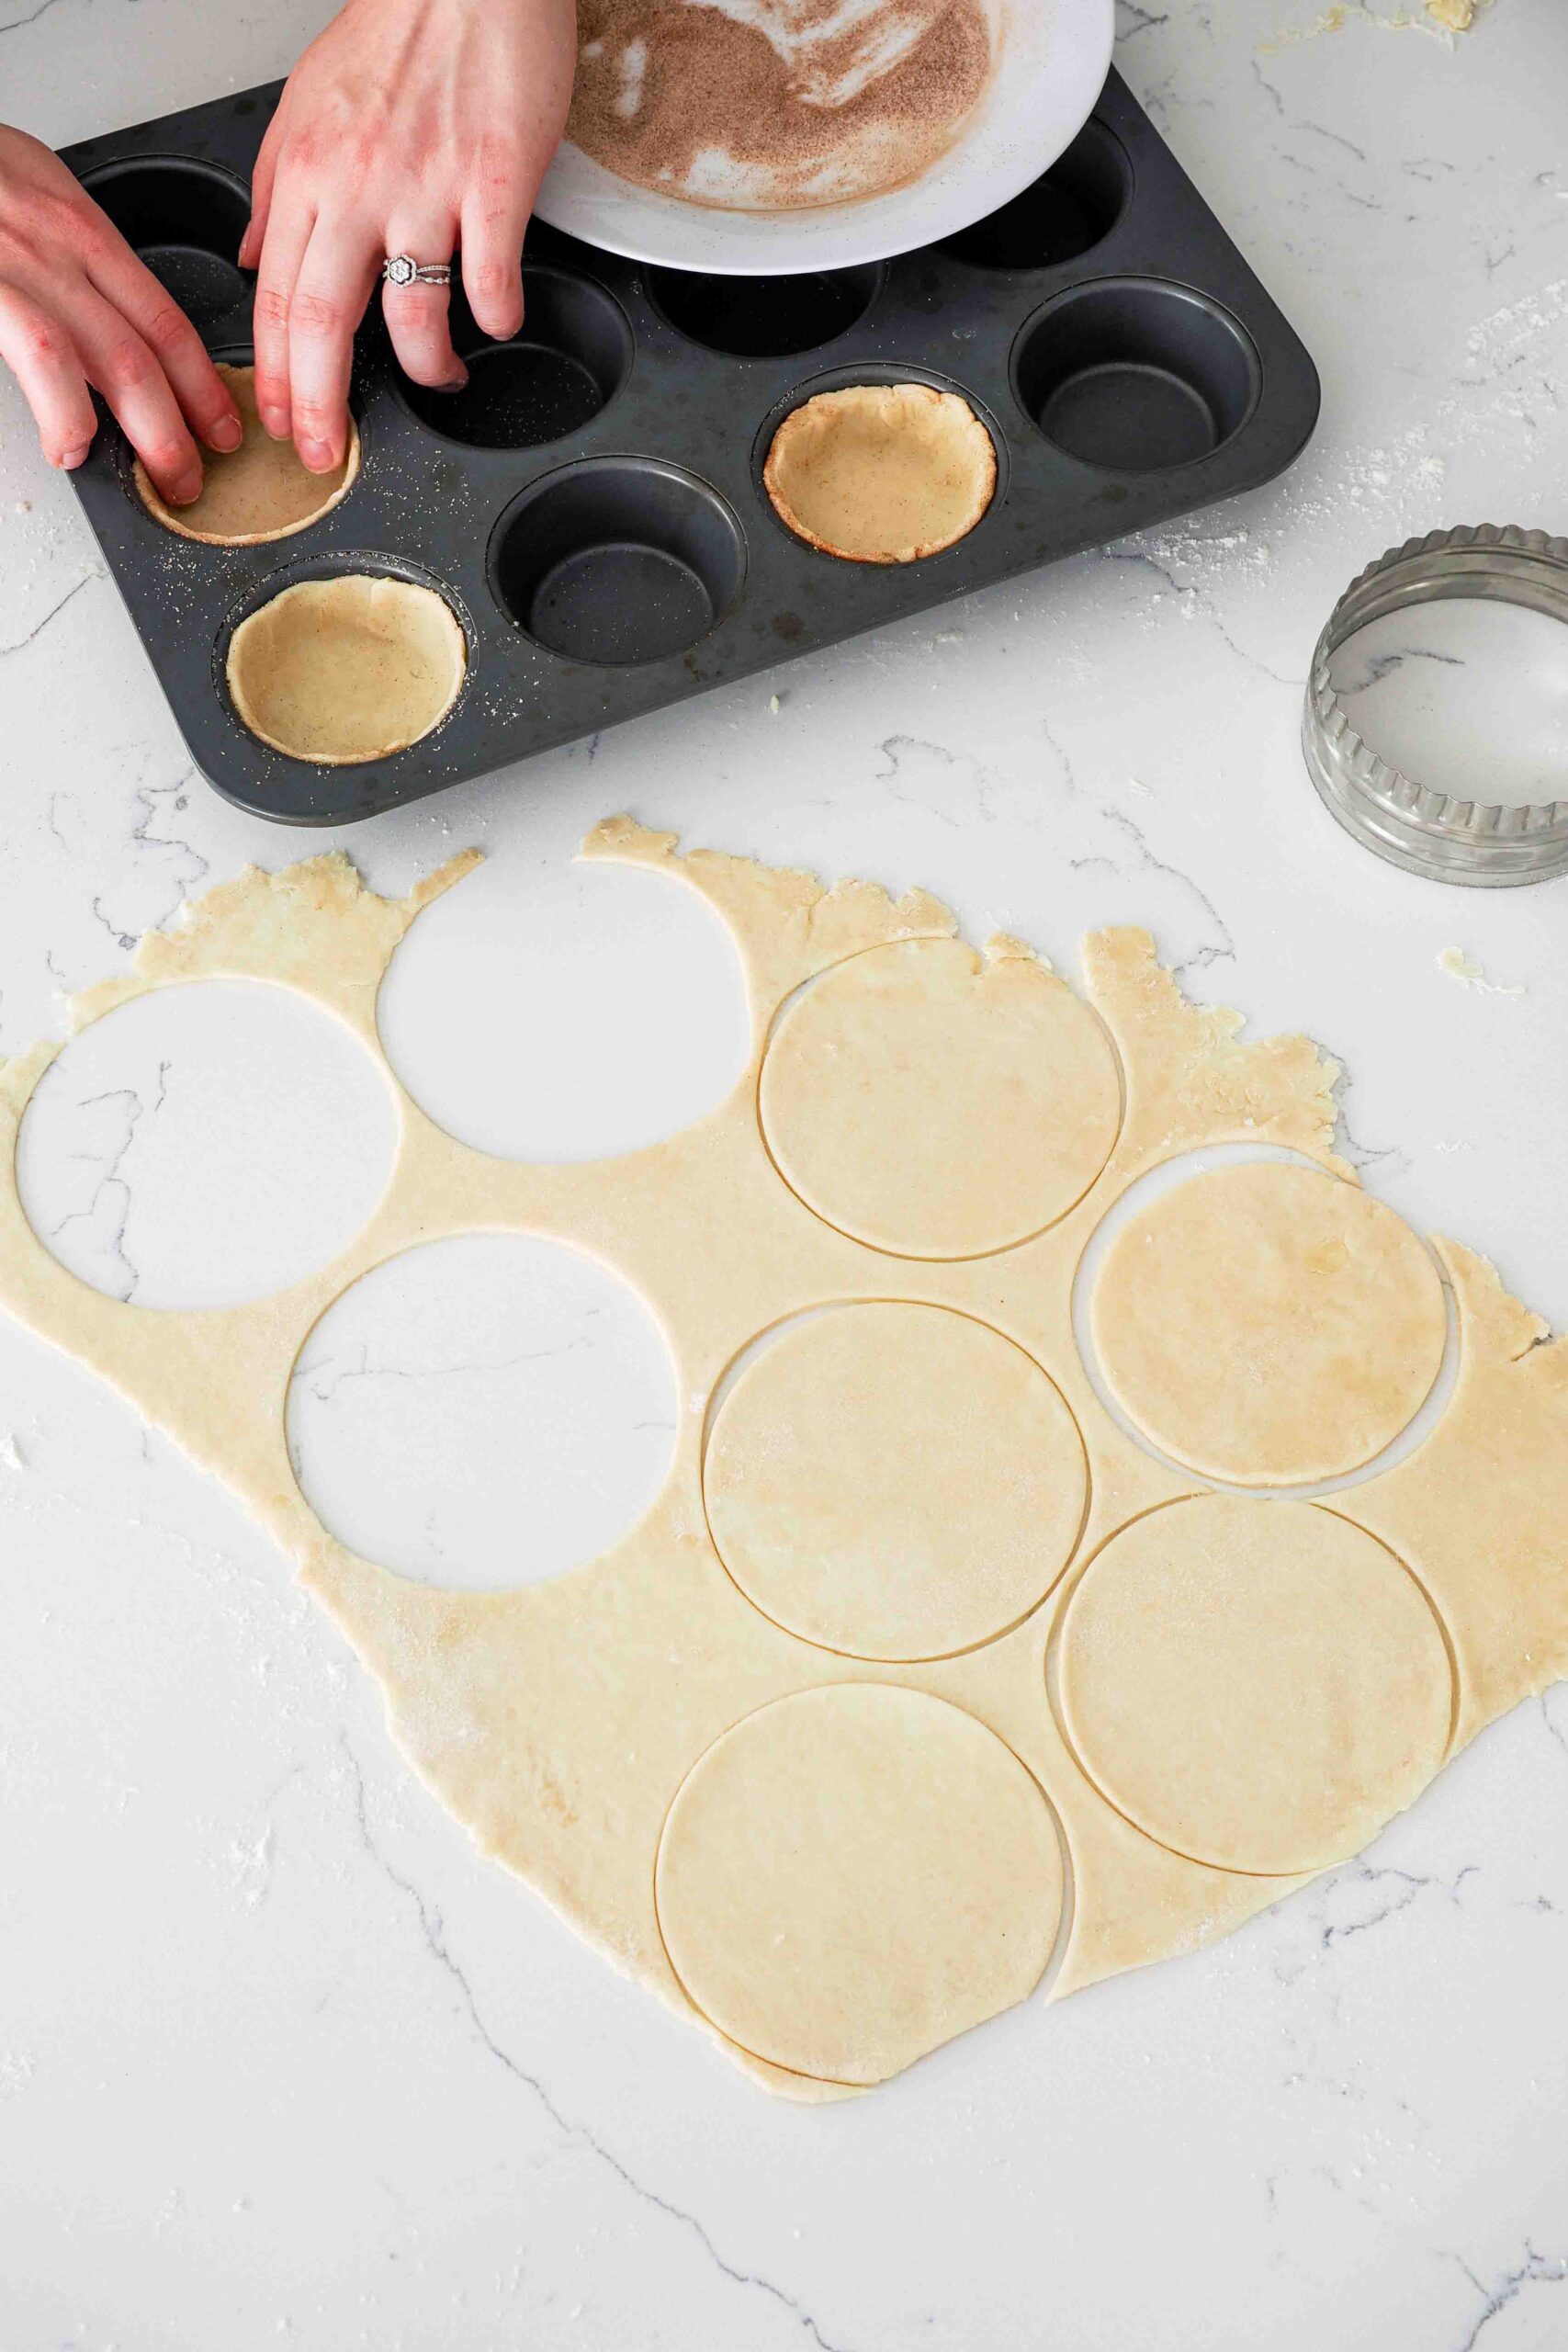 Two hands lightly press pie dough into a hole in a muffin pan.